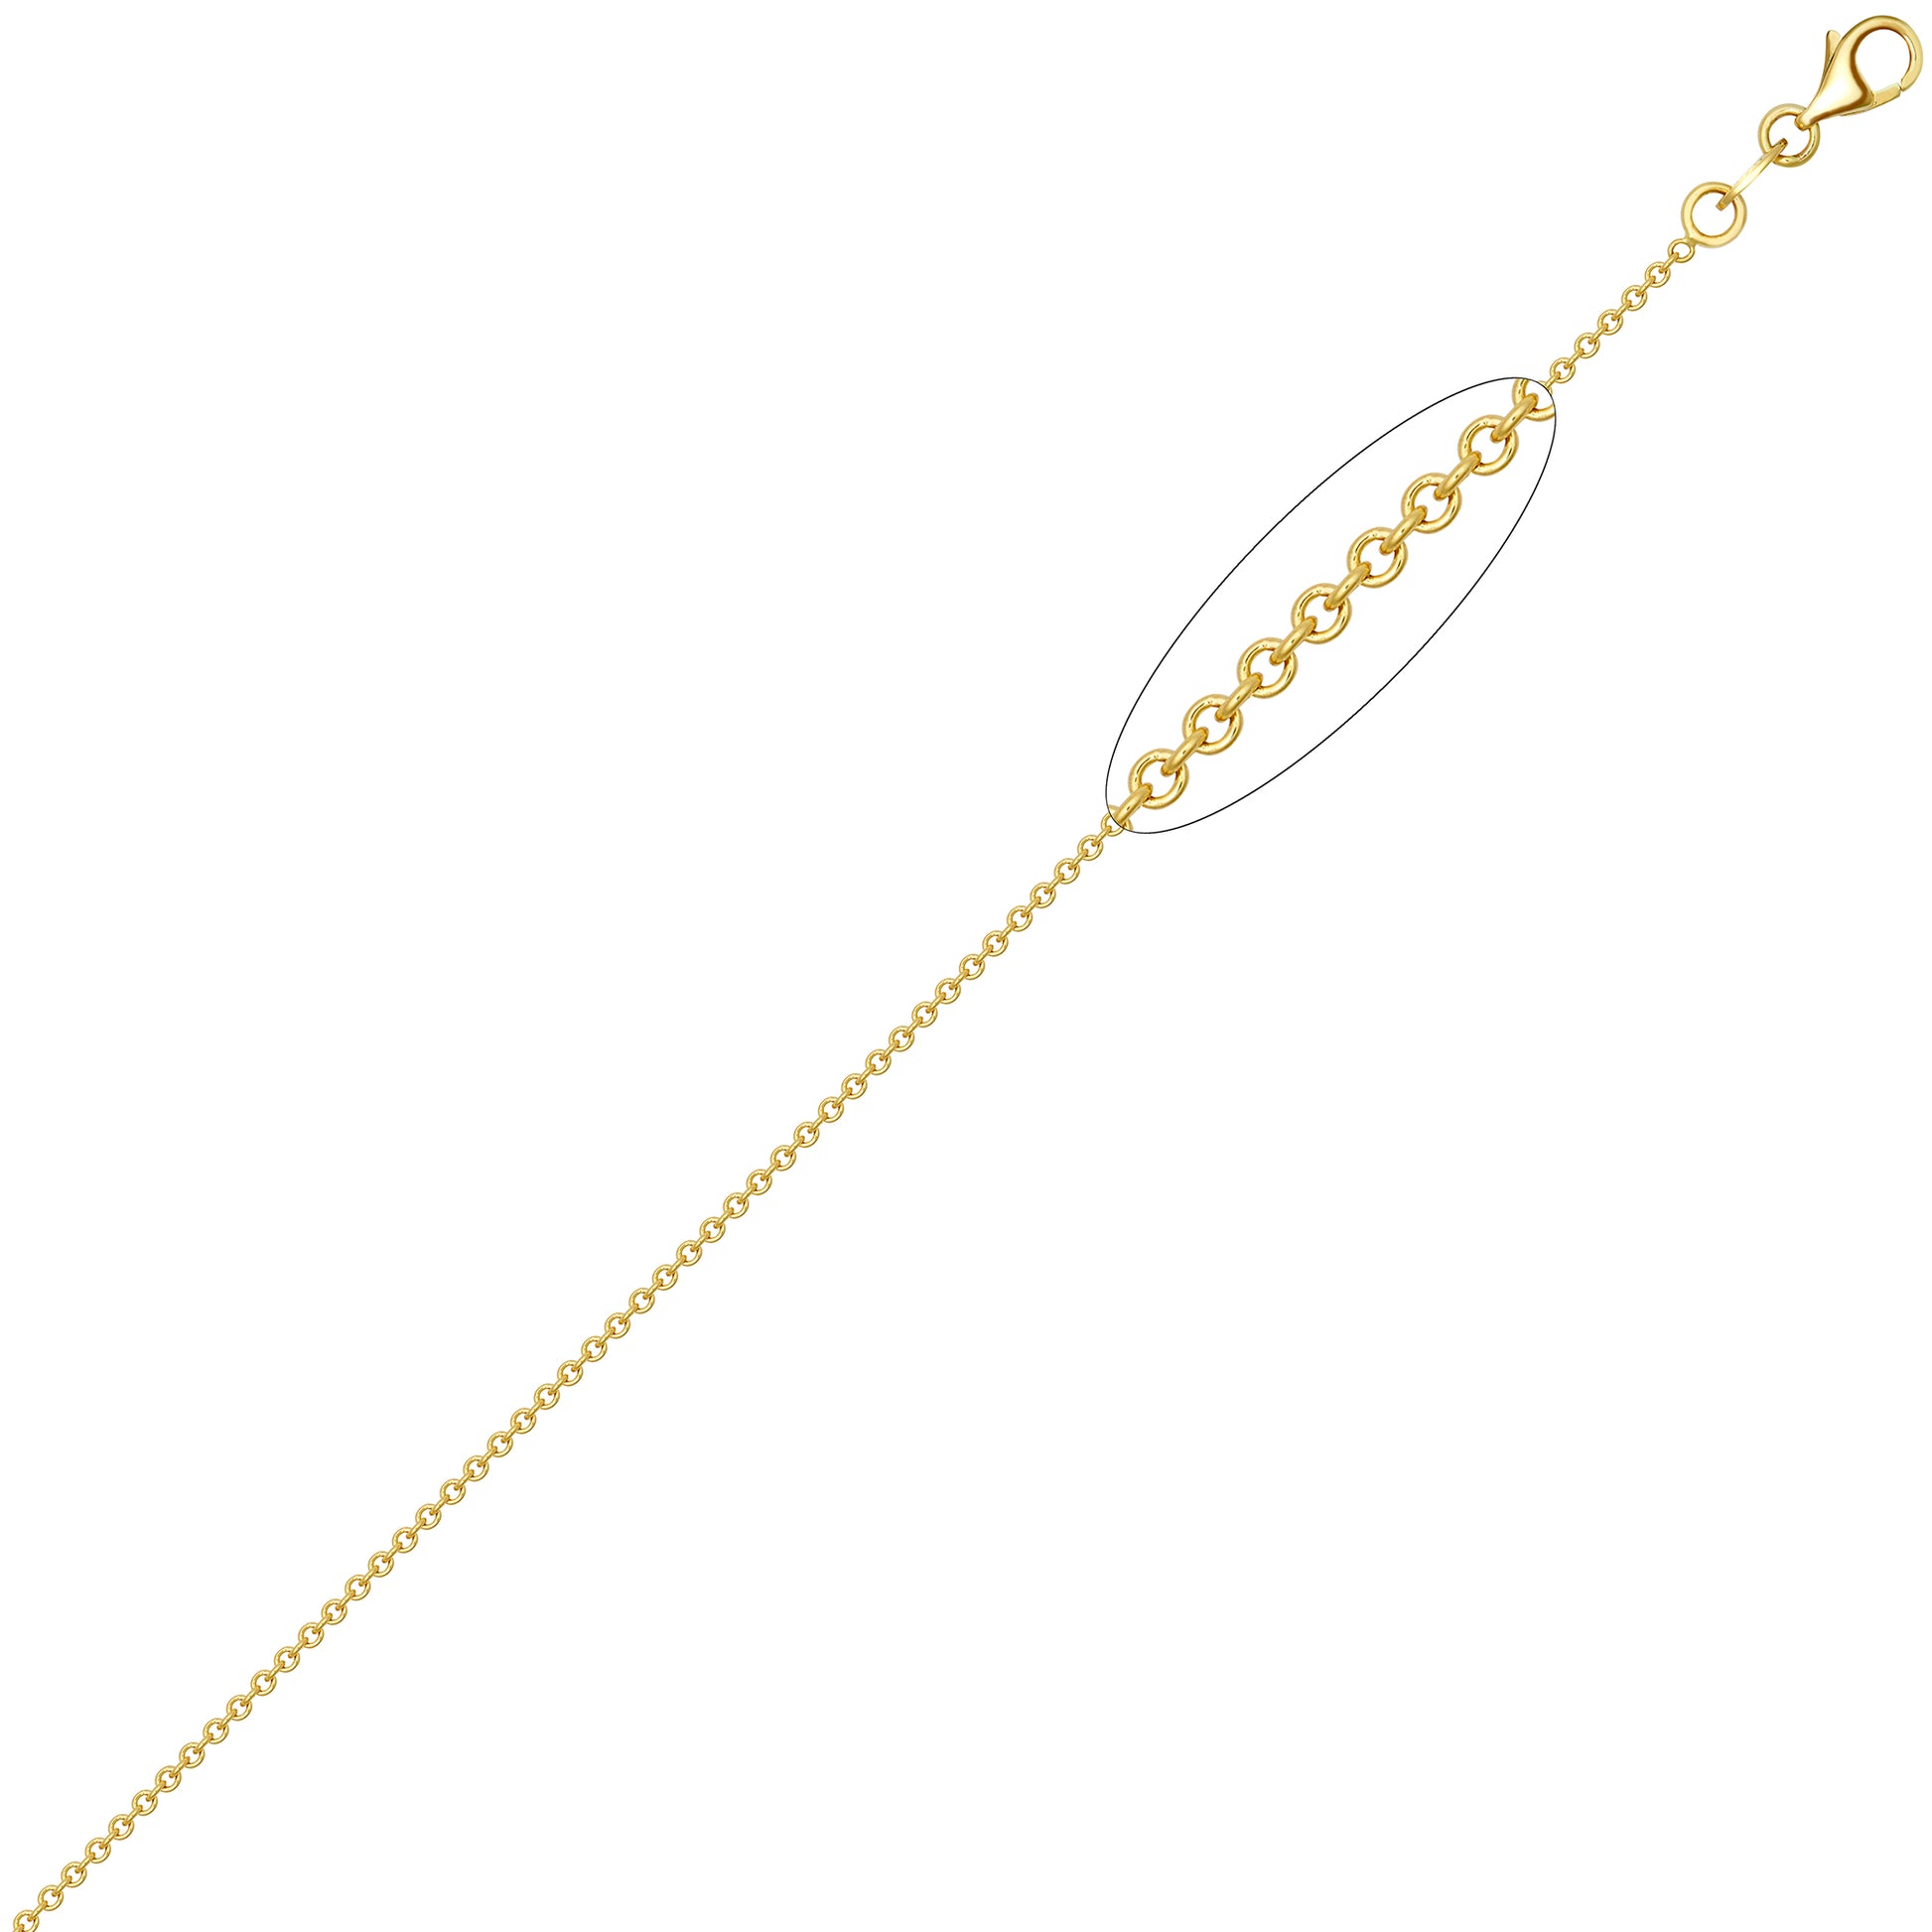 18ct Gold  Oval Link Rolo Trace 1.5mm Pendant Chain Necklace - JCN043A